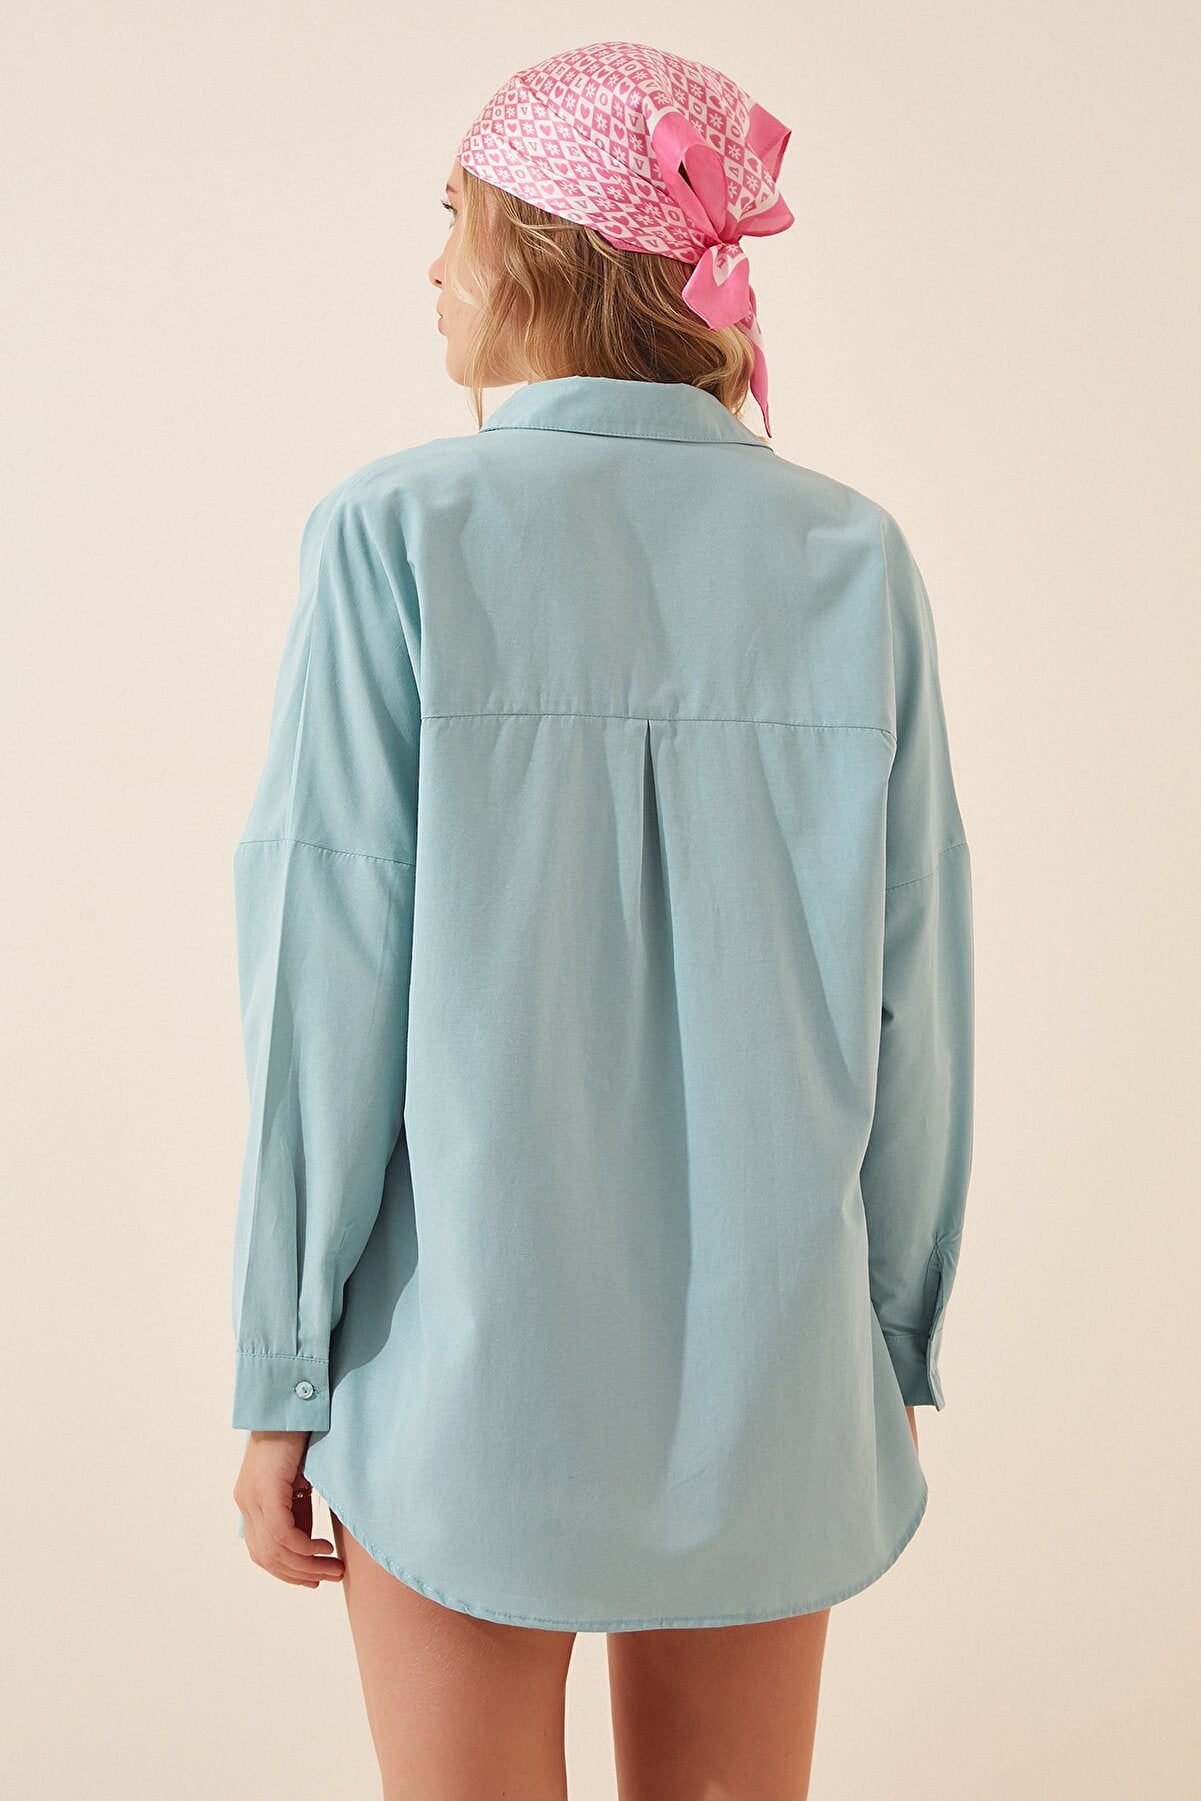 HAPPINESS IST OVERSIZED BUTTON SHIRT - PASTEL BLUE